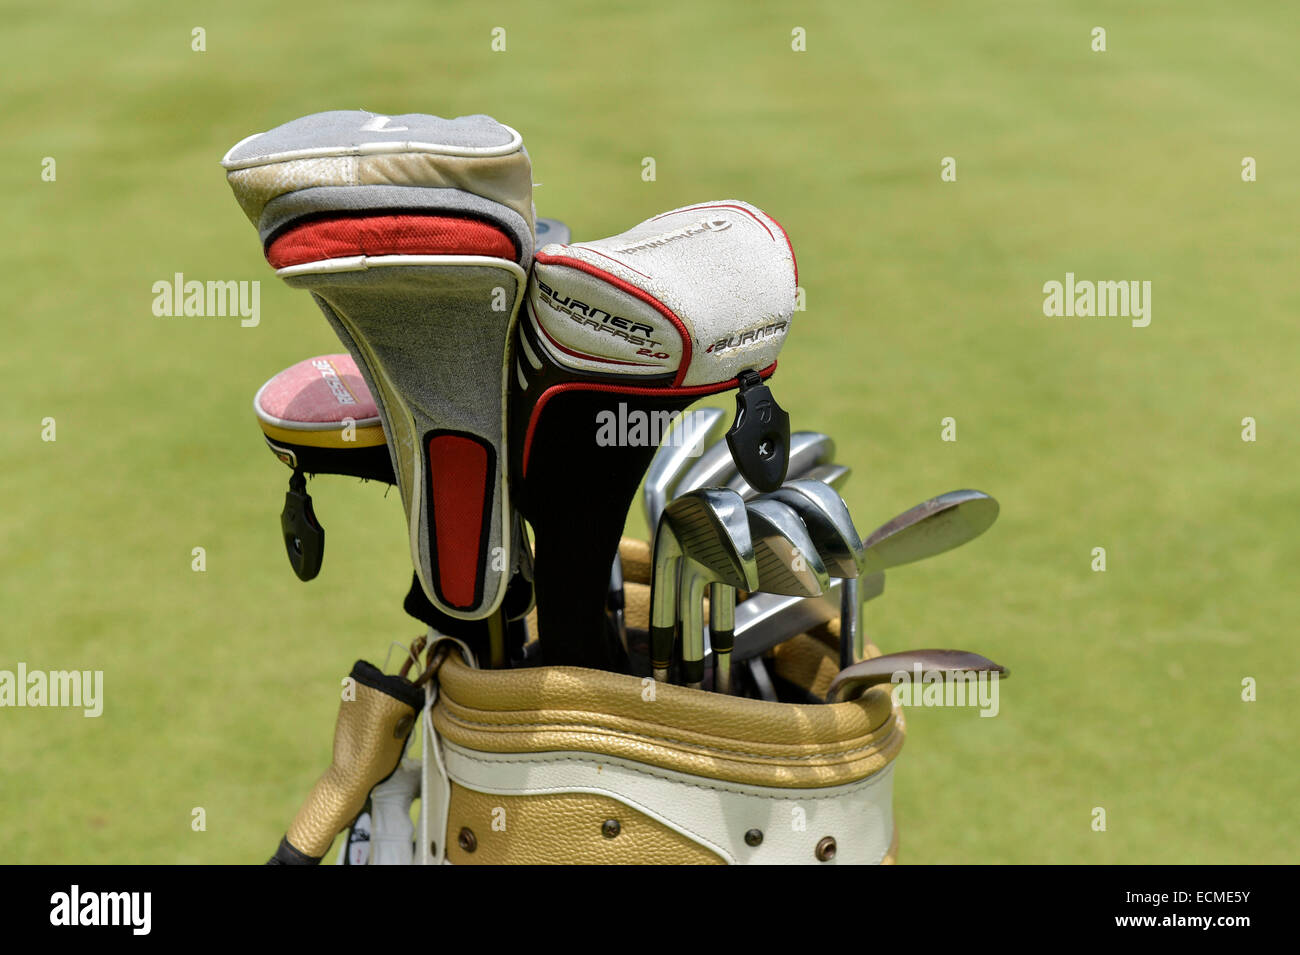 Detail view, golf bag with clubs on the green, Hua Hin, Thailand Stock Photo